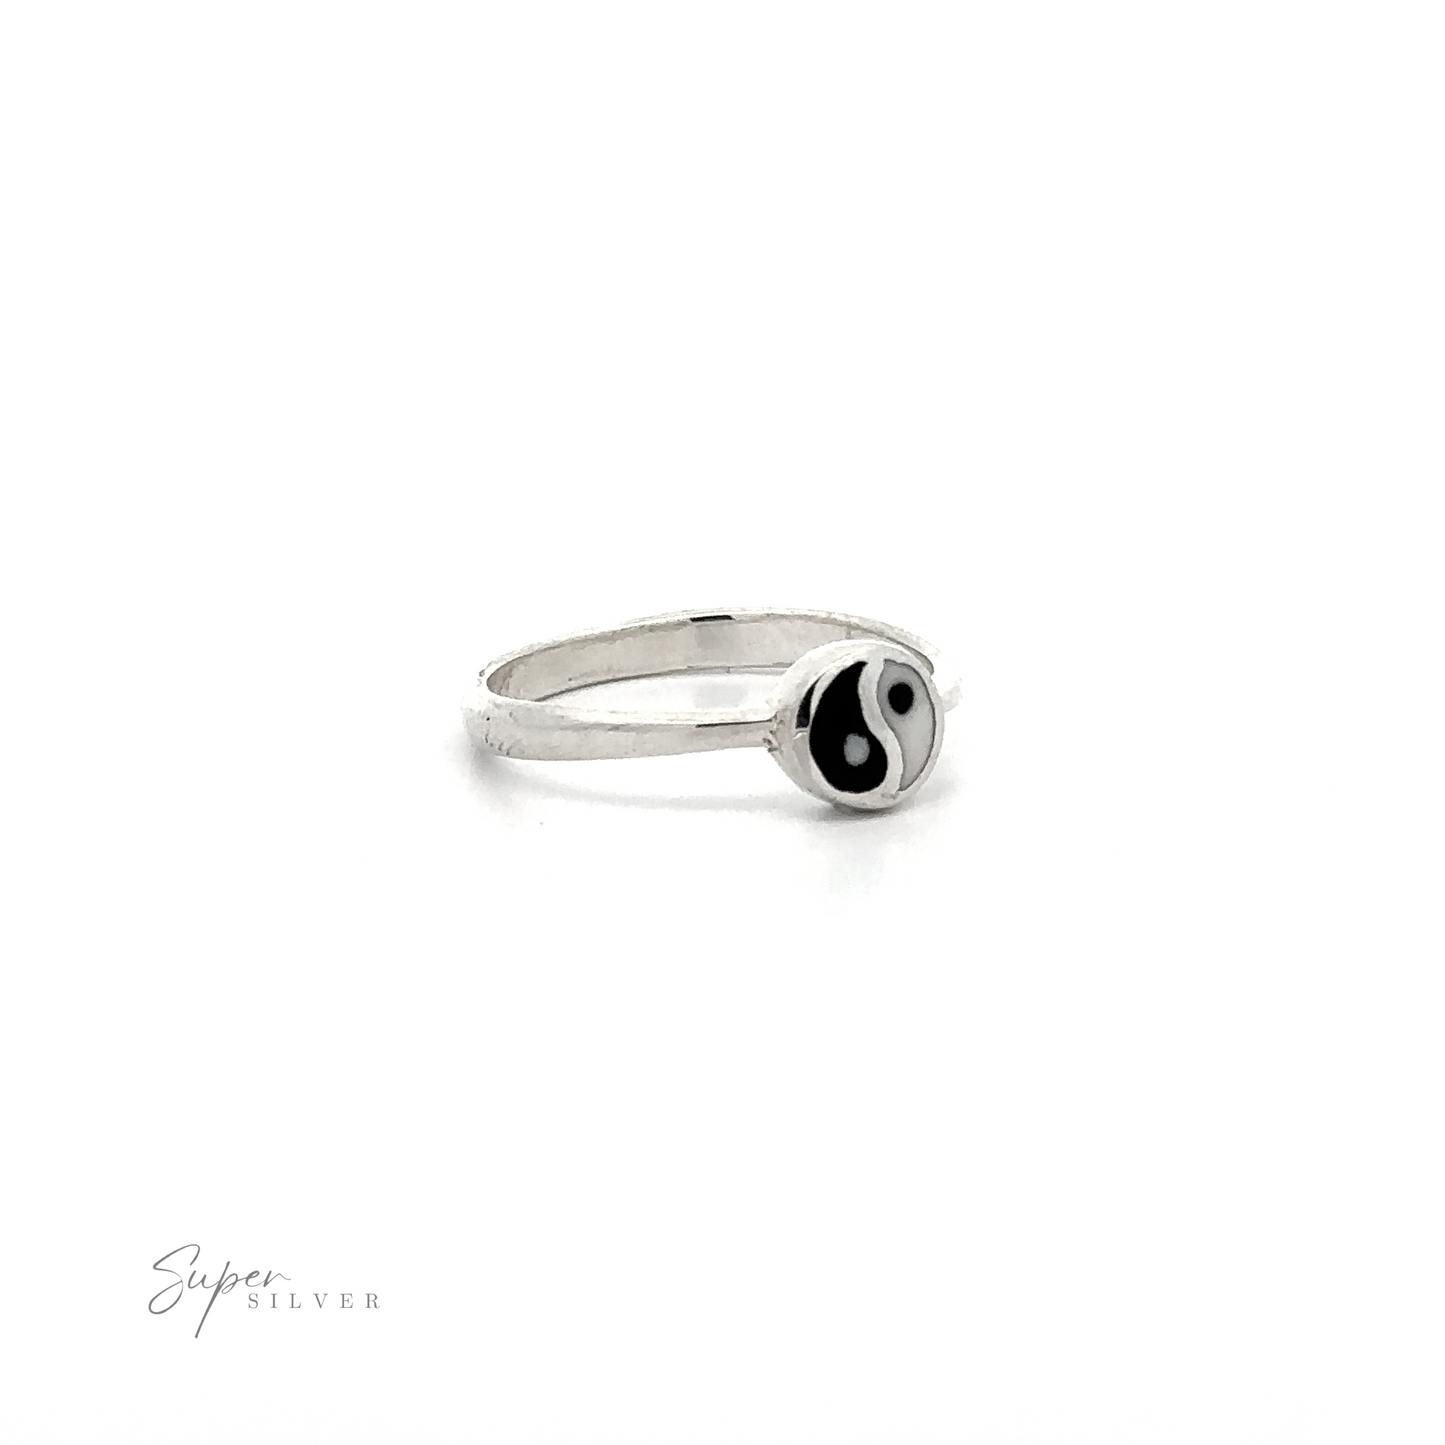 Balance harmoniously with this stunning Small Yin Yang Ring, featuring a silver band and a captivating black and white symbol.